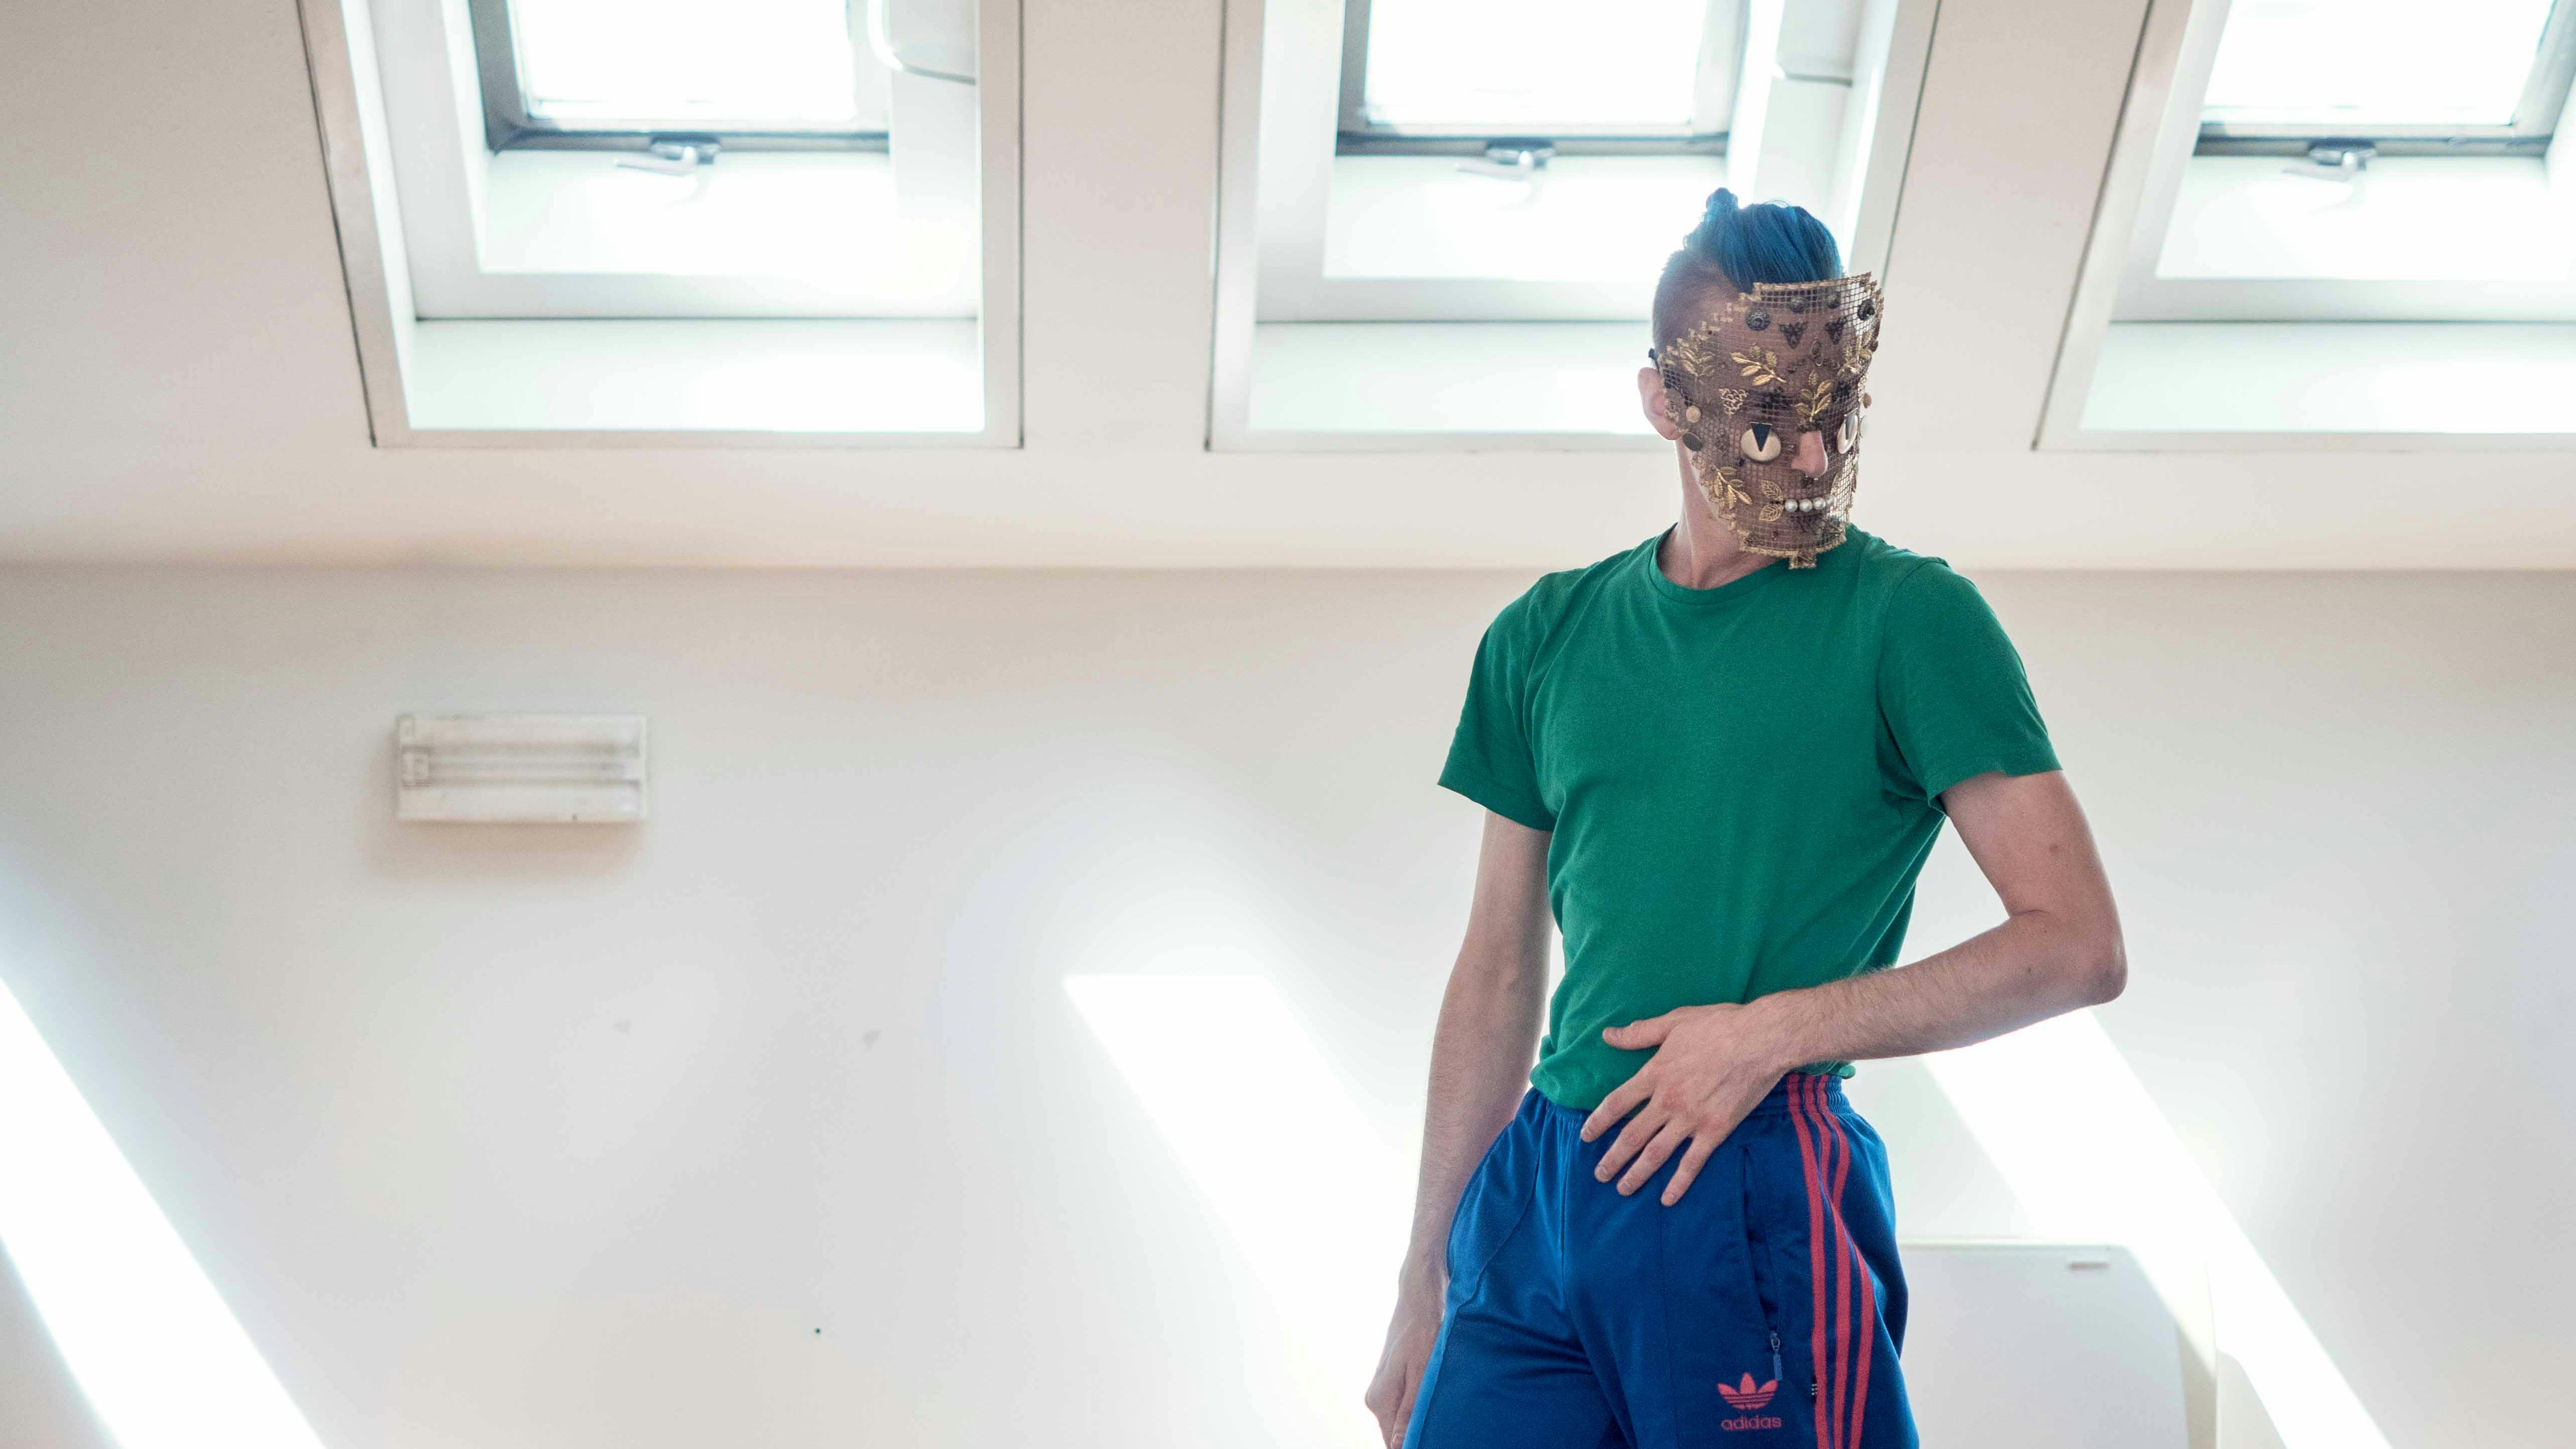 Nicola Galli, in the Studio, wearing one of his masks from "Il mondo altrove". He's dressed in a forensic green shirt and a blue jumpsuit.